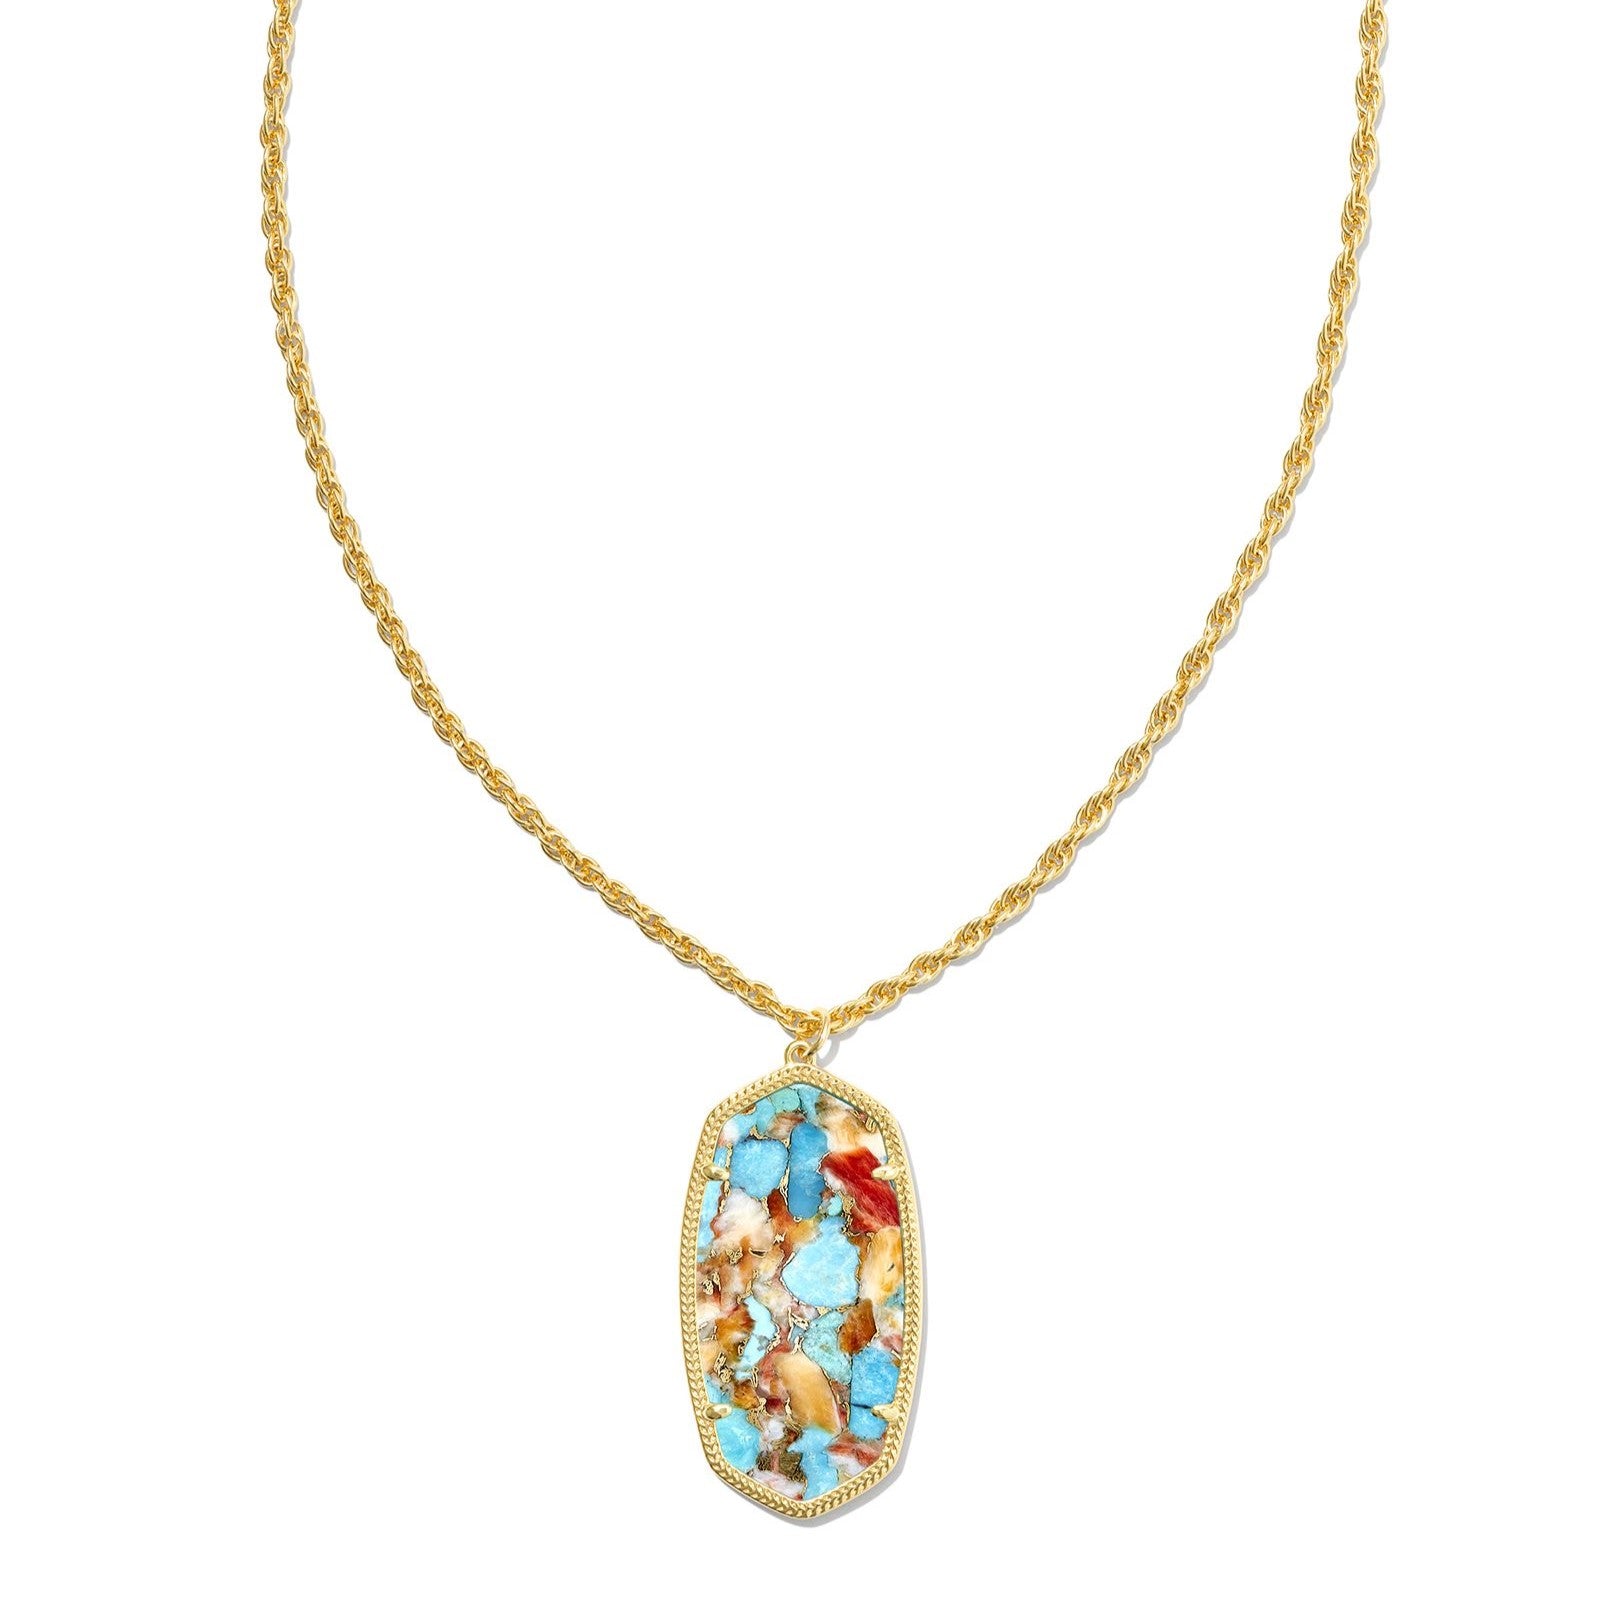 Kendra Scott | Rae Gold Long Pendant Necklace in Bronze Veined Turquoise Magnesite Red Oyster - Giddy Up Glamour Boutique